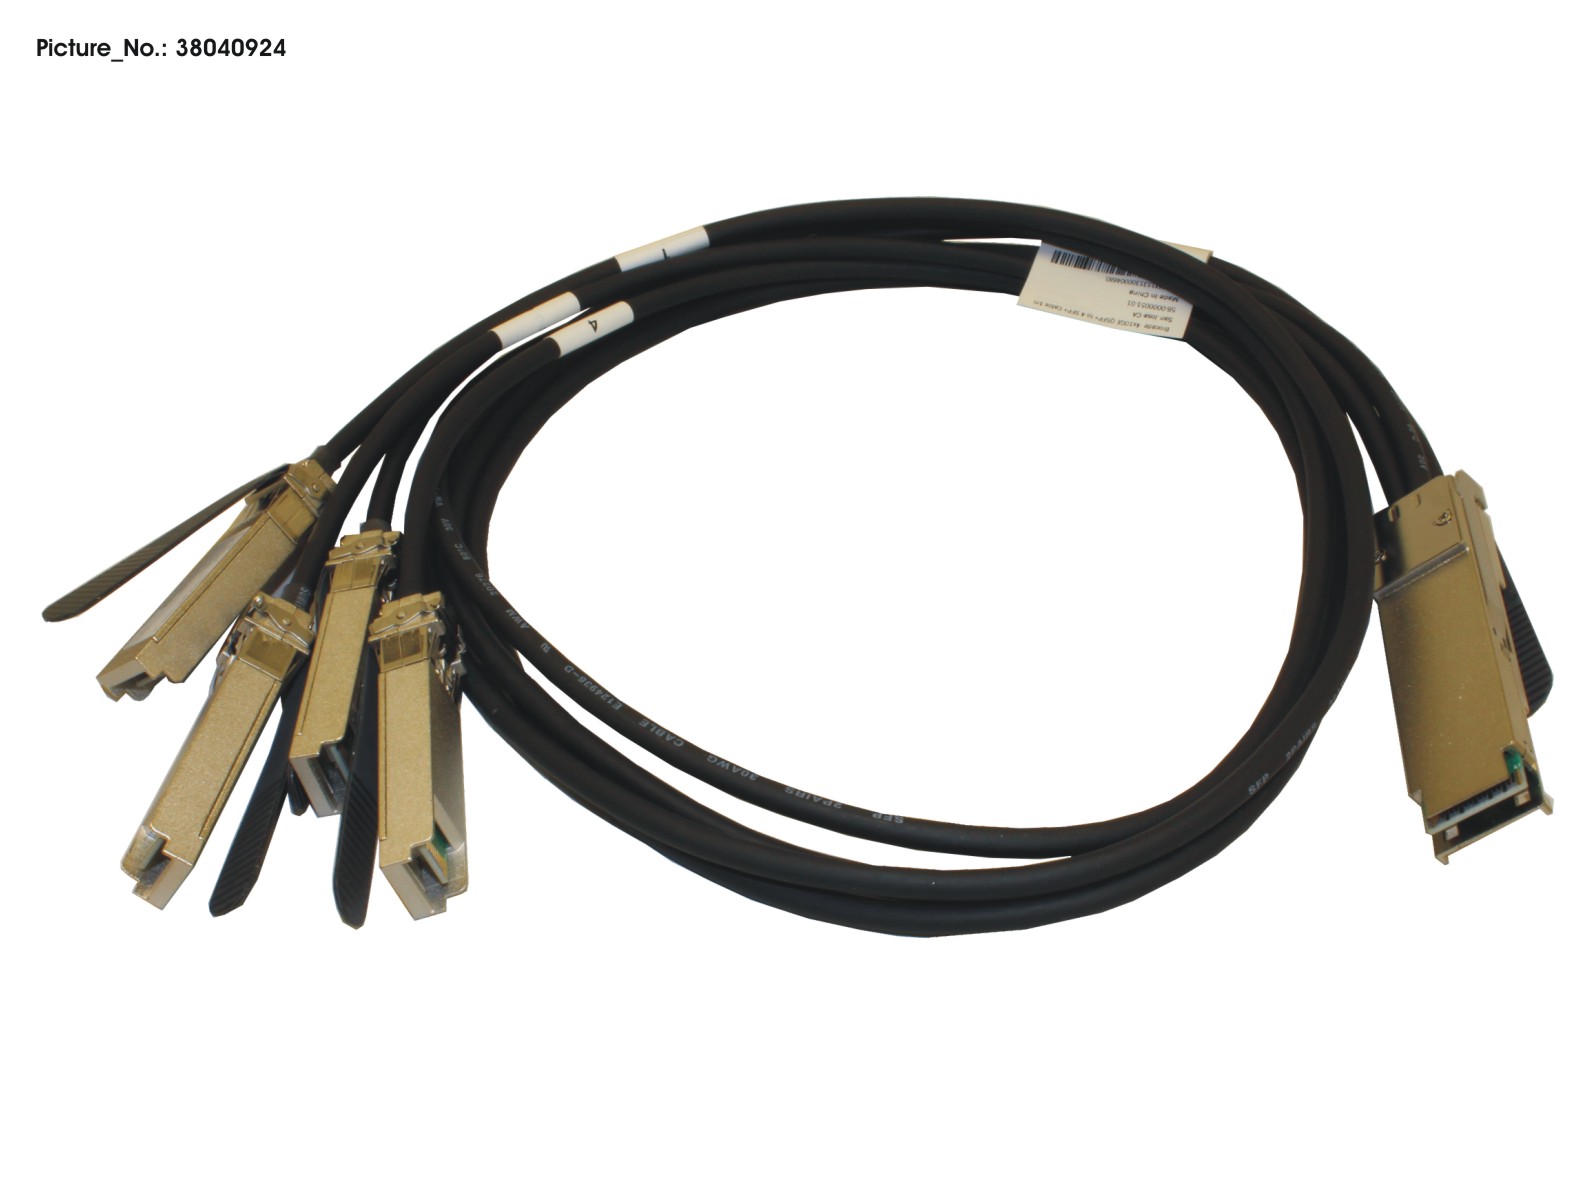 QSFP+/4XSFP+ BREAKOUT CABLE BROCADE 1M